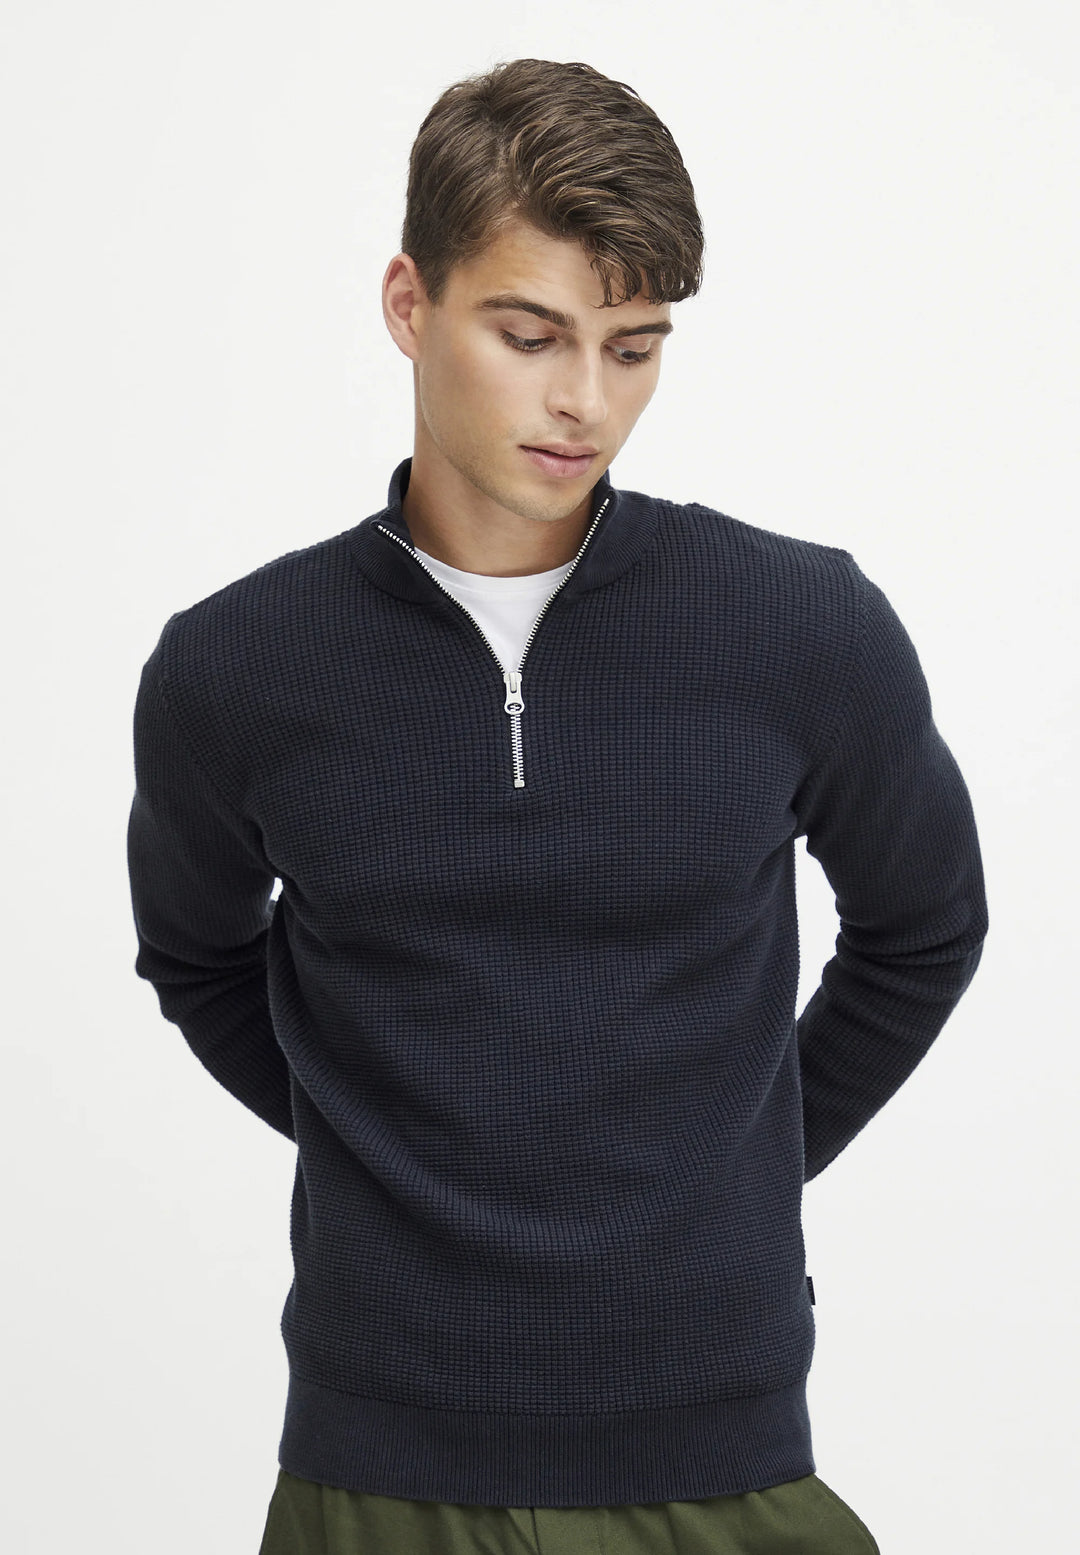 Casual Friday Karlo Half Zipper Knit - Anthracite Black